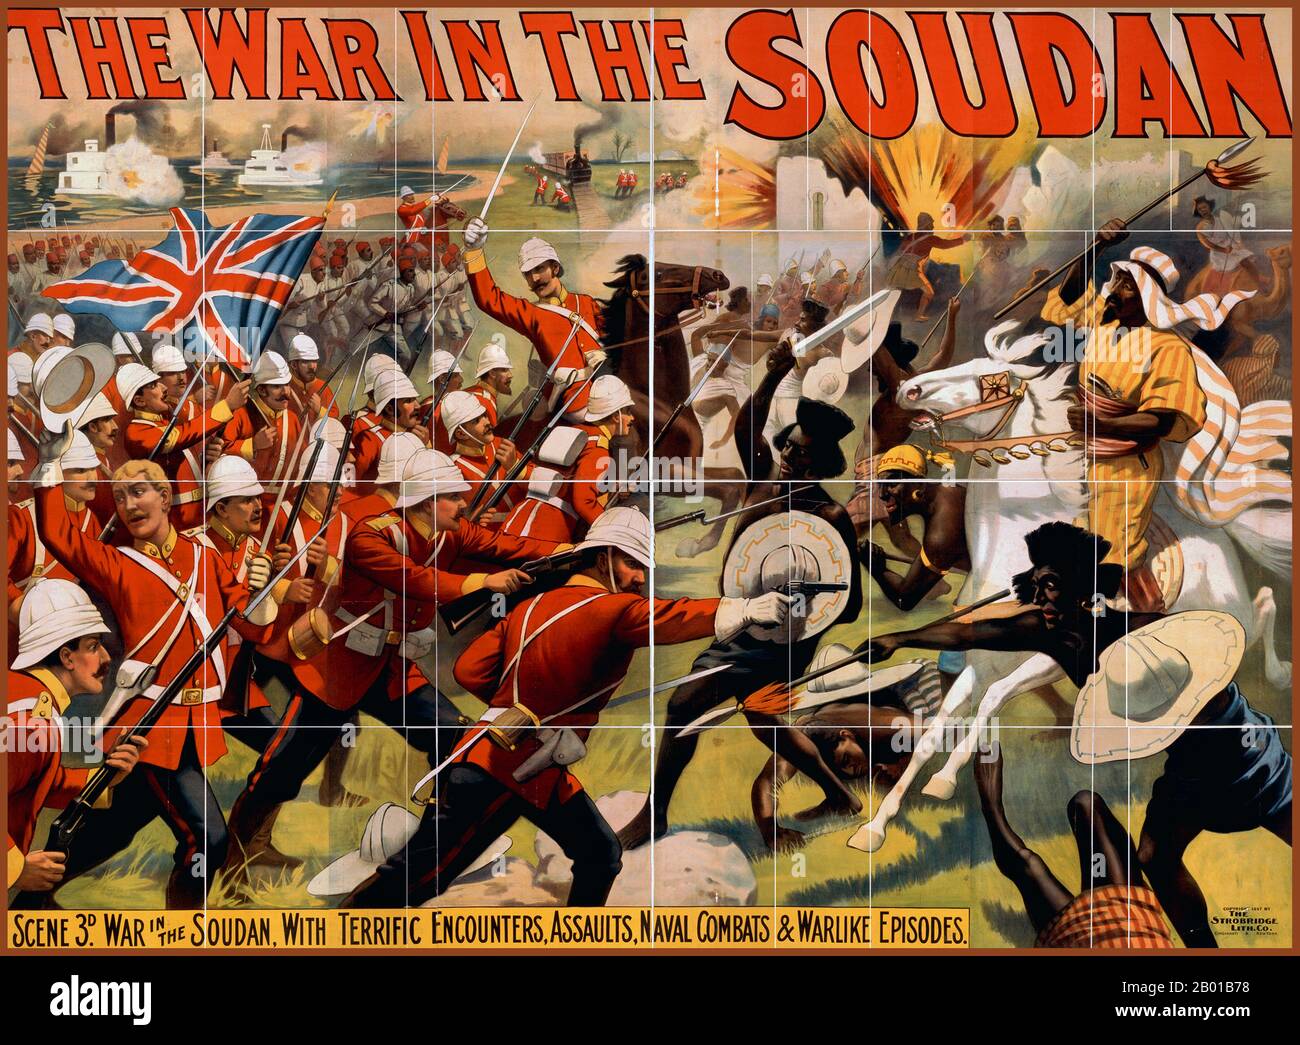 Sudan/South Sudan: 'The War in the Soudan'. Colour lithograph, 1897.  American theatrical poster published by Strobridge & Co., Cincinnati and New York.  The Mahdist War (1881-1899) was a conflict fought between Mahdist Sudanese, led by Muhammad Ahmad bin Abd Allah, the self-proclaimed 'Mahdi', and the forces of the Khedivate of Egypt, with Britain getting involved in the latter stages of the war. After eighteen years of war, The Mahdists lost and Sudan became Anglo-Egyptian Sudan, a de jure condominium between the Kingdom of Egypt and the British Empire in which Britain had de facto control. Stock Photo